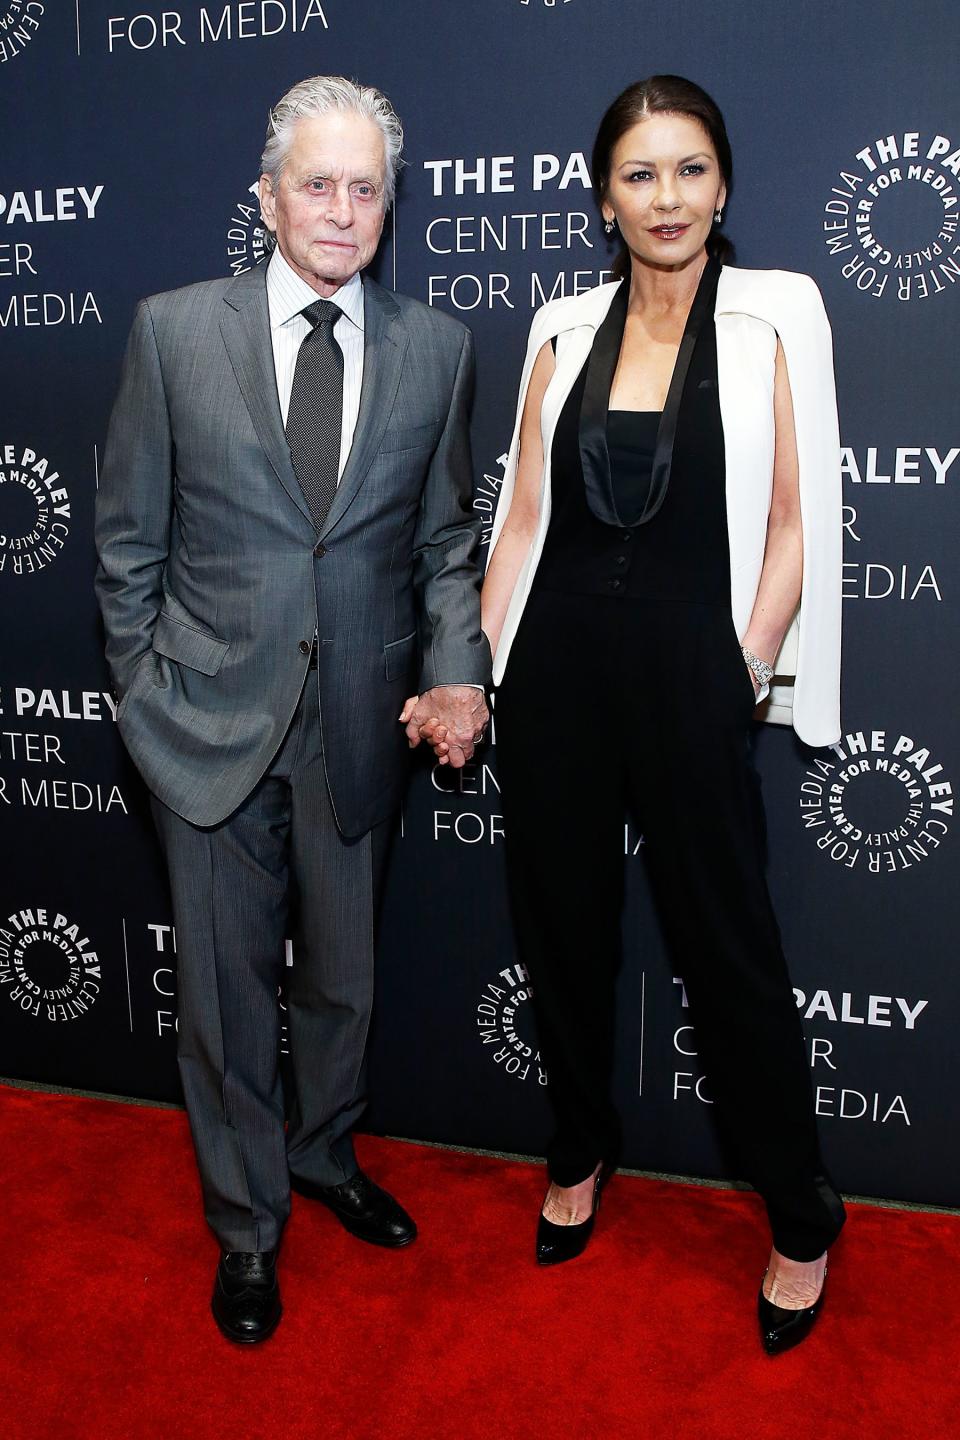 Michael Douglas and Catherine Zeta-Jones attend A Paley Honors Luncheon celebrating Michael Douglas at The Paley Center for Media in N.Y.C. on Thursday.